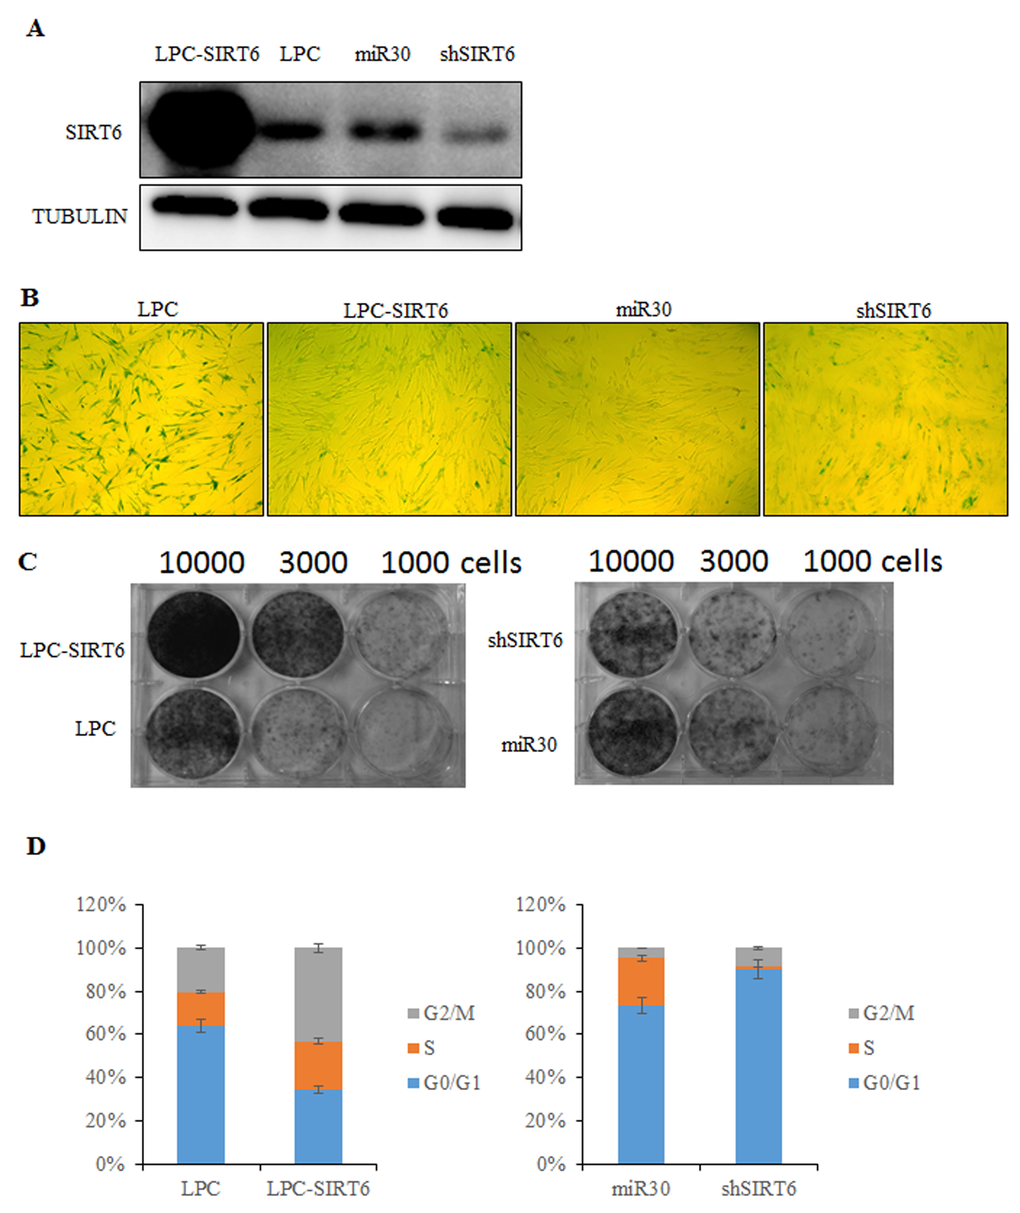 SIRT6 represses senescent-associated features in 2BS cells. (A) Western blot analysis of SIRT6 expression levels in SIRT6-overexpression (LPC-SIRT6) and SIRT6-knockdown (shSIRT6) 2BS cells. (B) SIRT6-overexpression and SIRT6-knockdown 2BS cells were stained for SA-β-gal activity. (C) Colony formation assay was performed using SIRT6-overexpression and SIRT6-knockdown 2BS cells. (D) Flow cytometry analysis of SIRT6-overexpression and SIRT6-knockown 2BS cells. Values represent the means ± S.E. of triplicate points from a representative experiment (n=3), which was repeated three times.